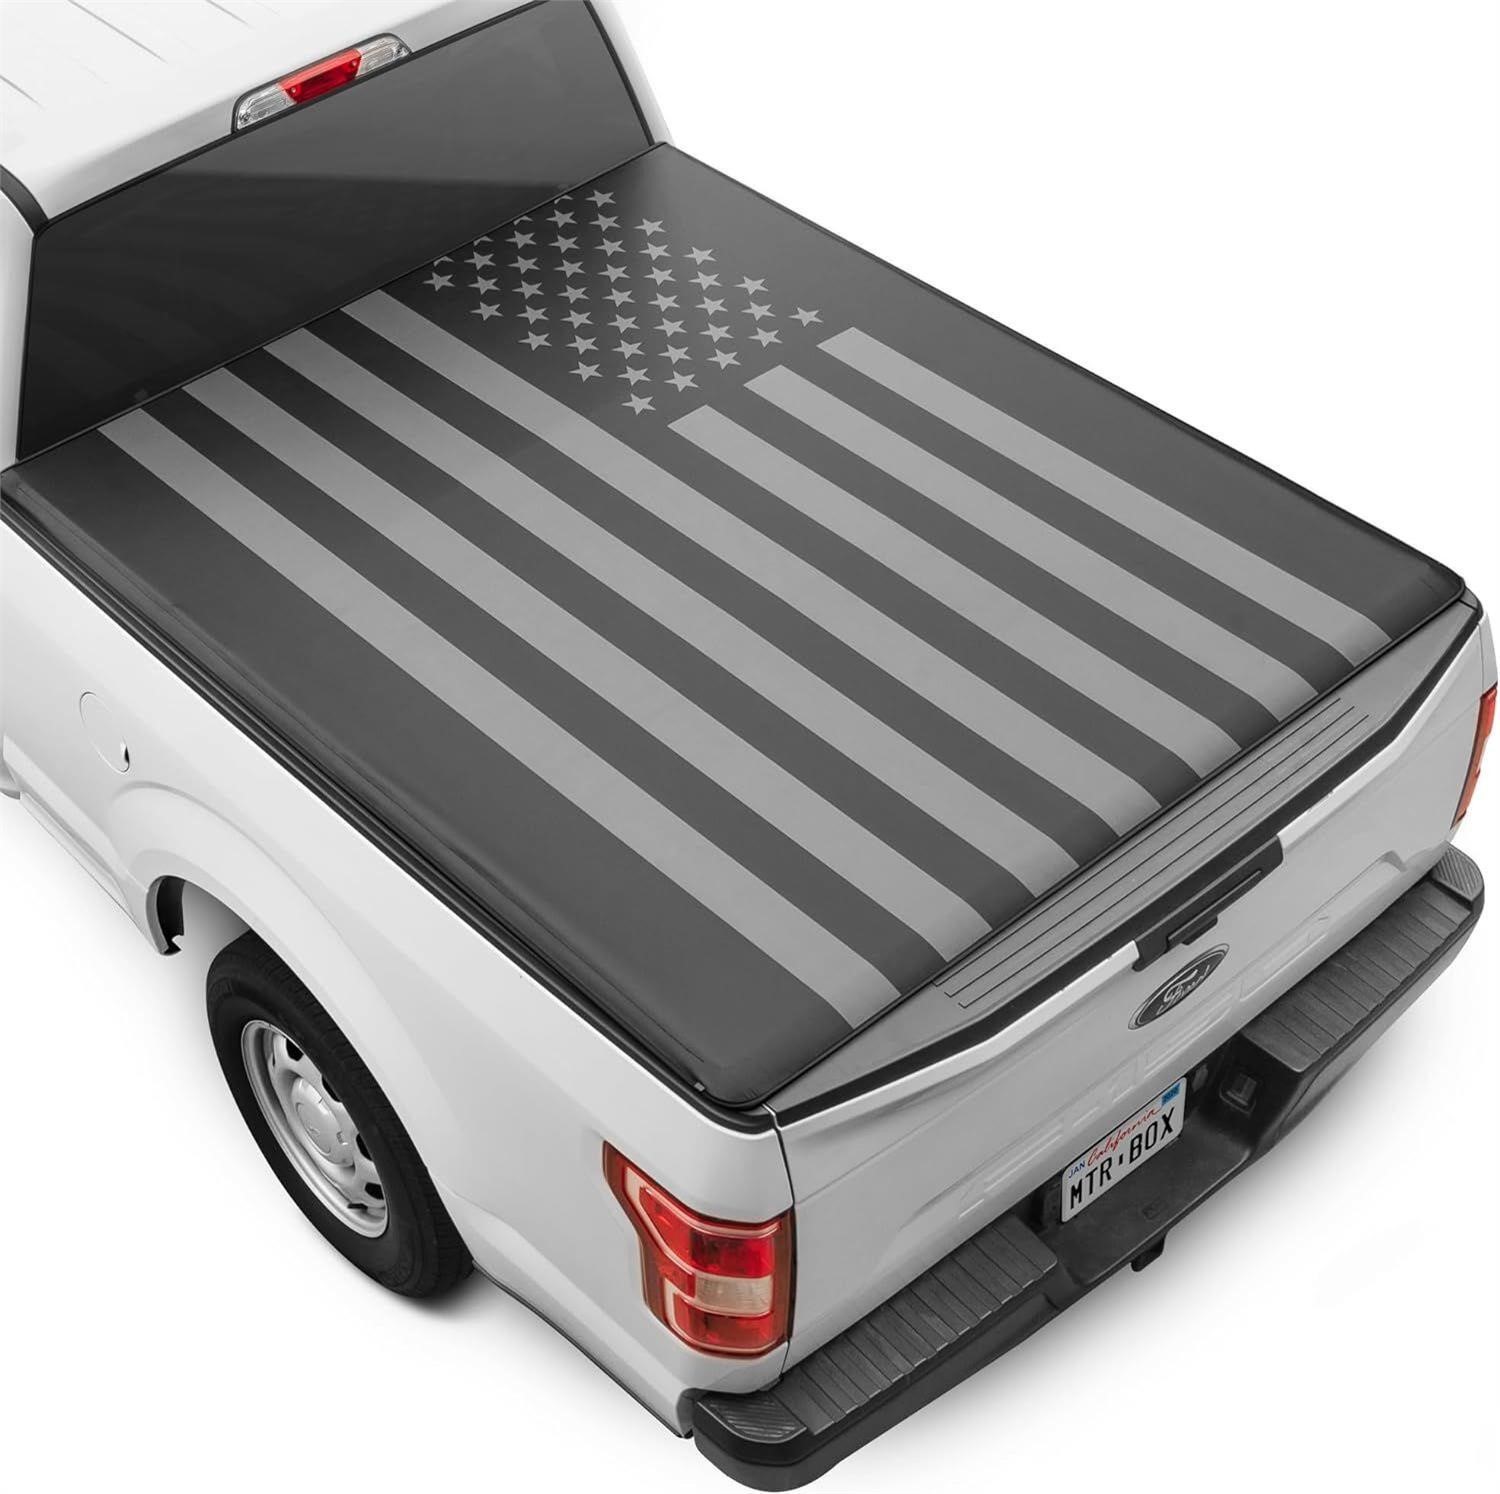 Soft Roll-Up Truck Tonneau Cover for Ford F-150